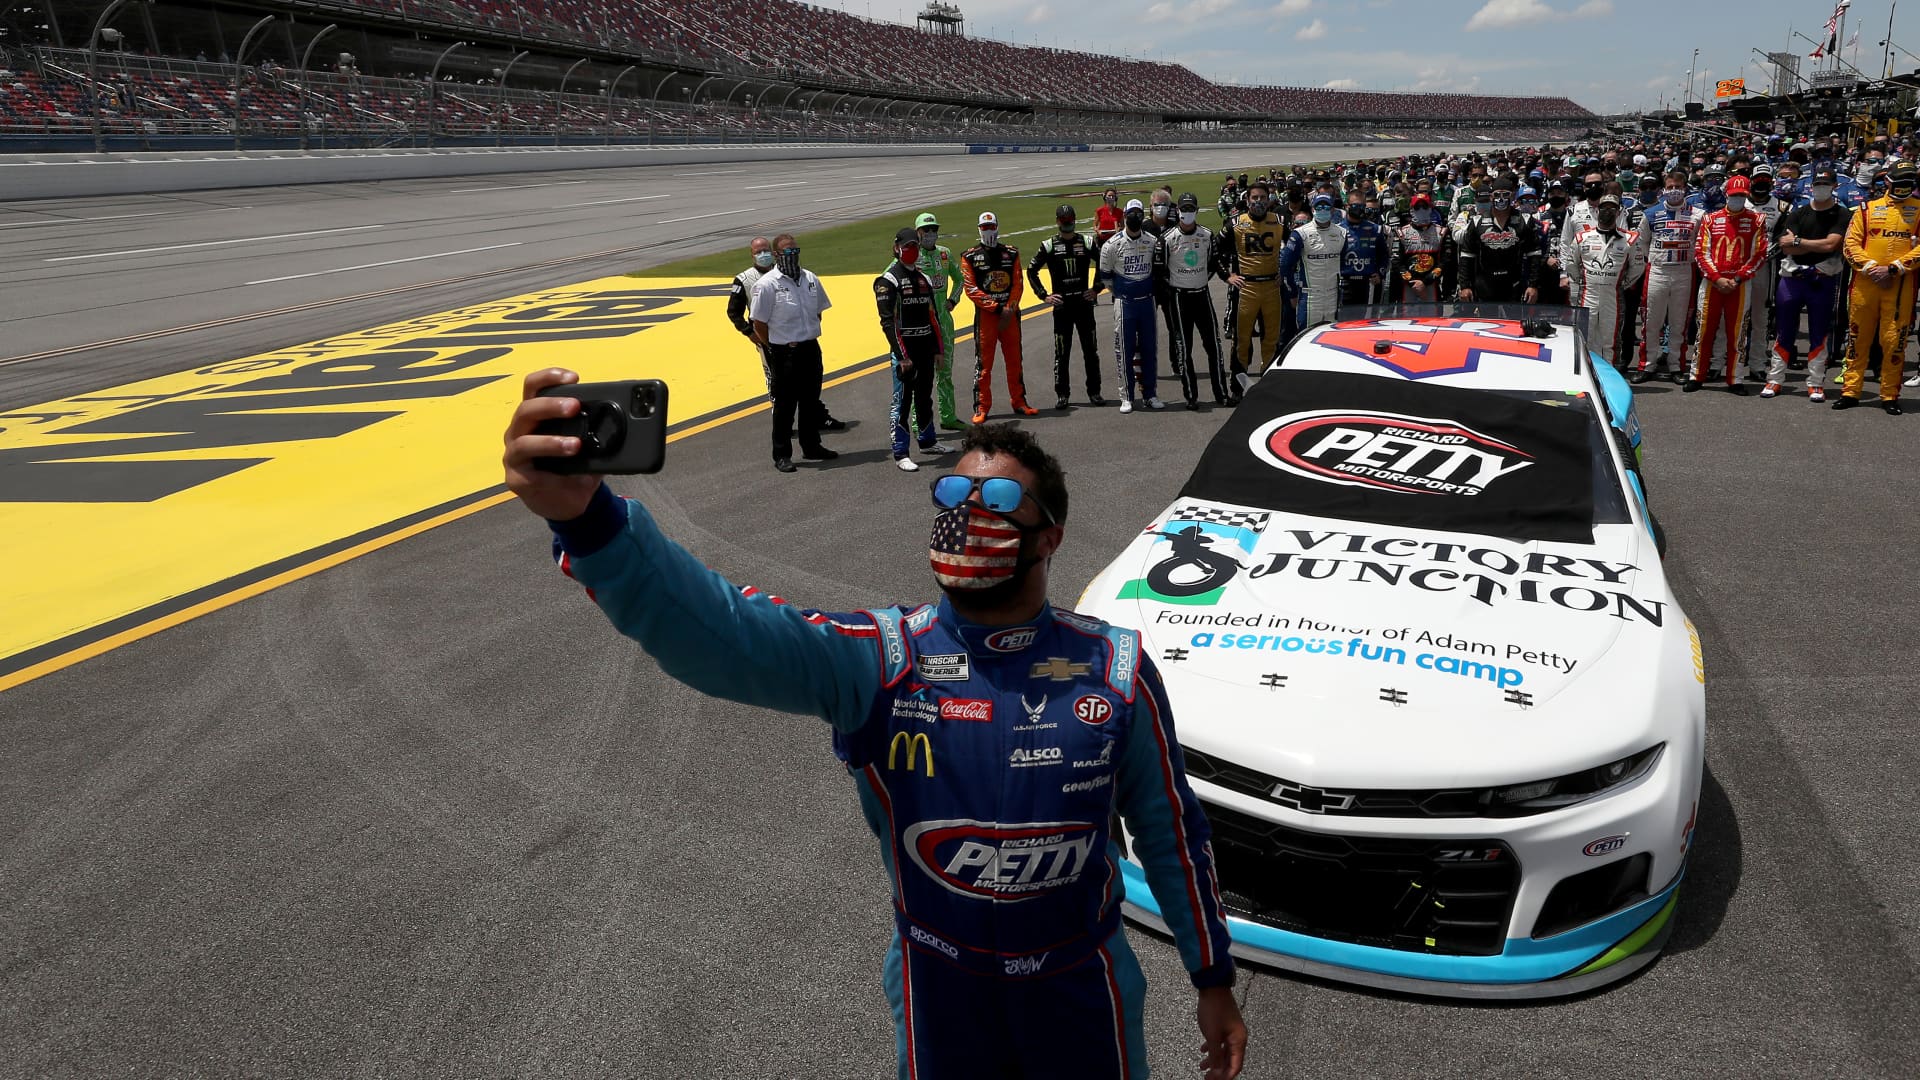 Bubba Wallace, driver of the #43 Victory Junction Chevrolet, takes a selfie with NASCAR drivers that pushed him to the front of the grid as a sign of solidarity with the driver prior to the NASCAR Cup Series GEICO 500 at Talladega Superspeedway on June 22, 2020 in Talladega, Alabama.